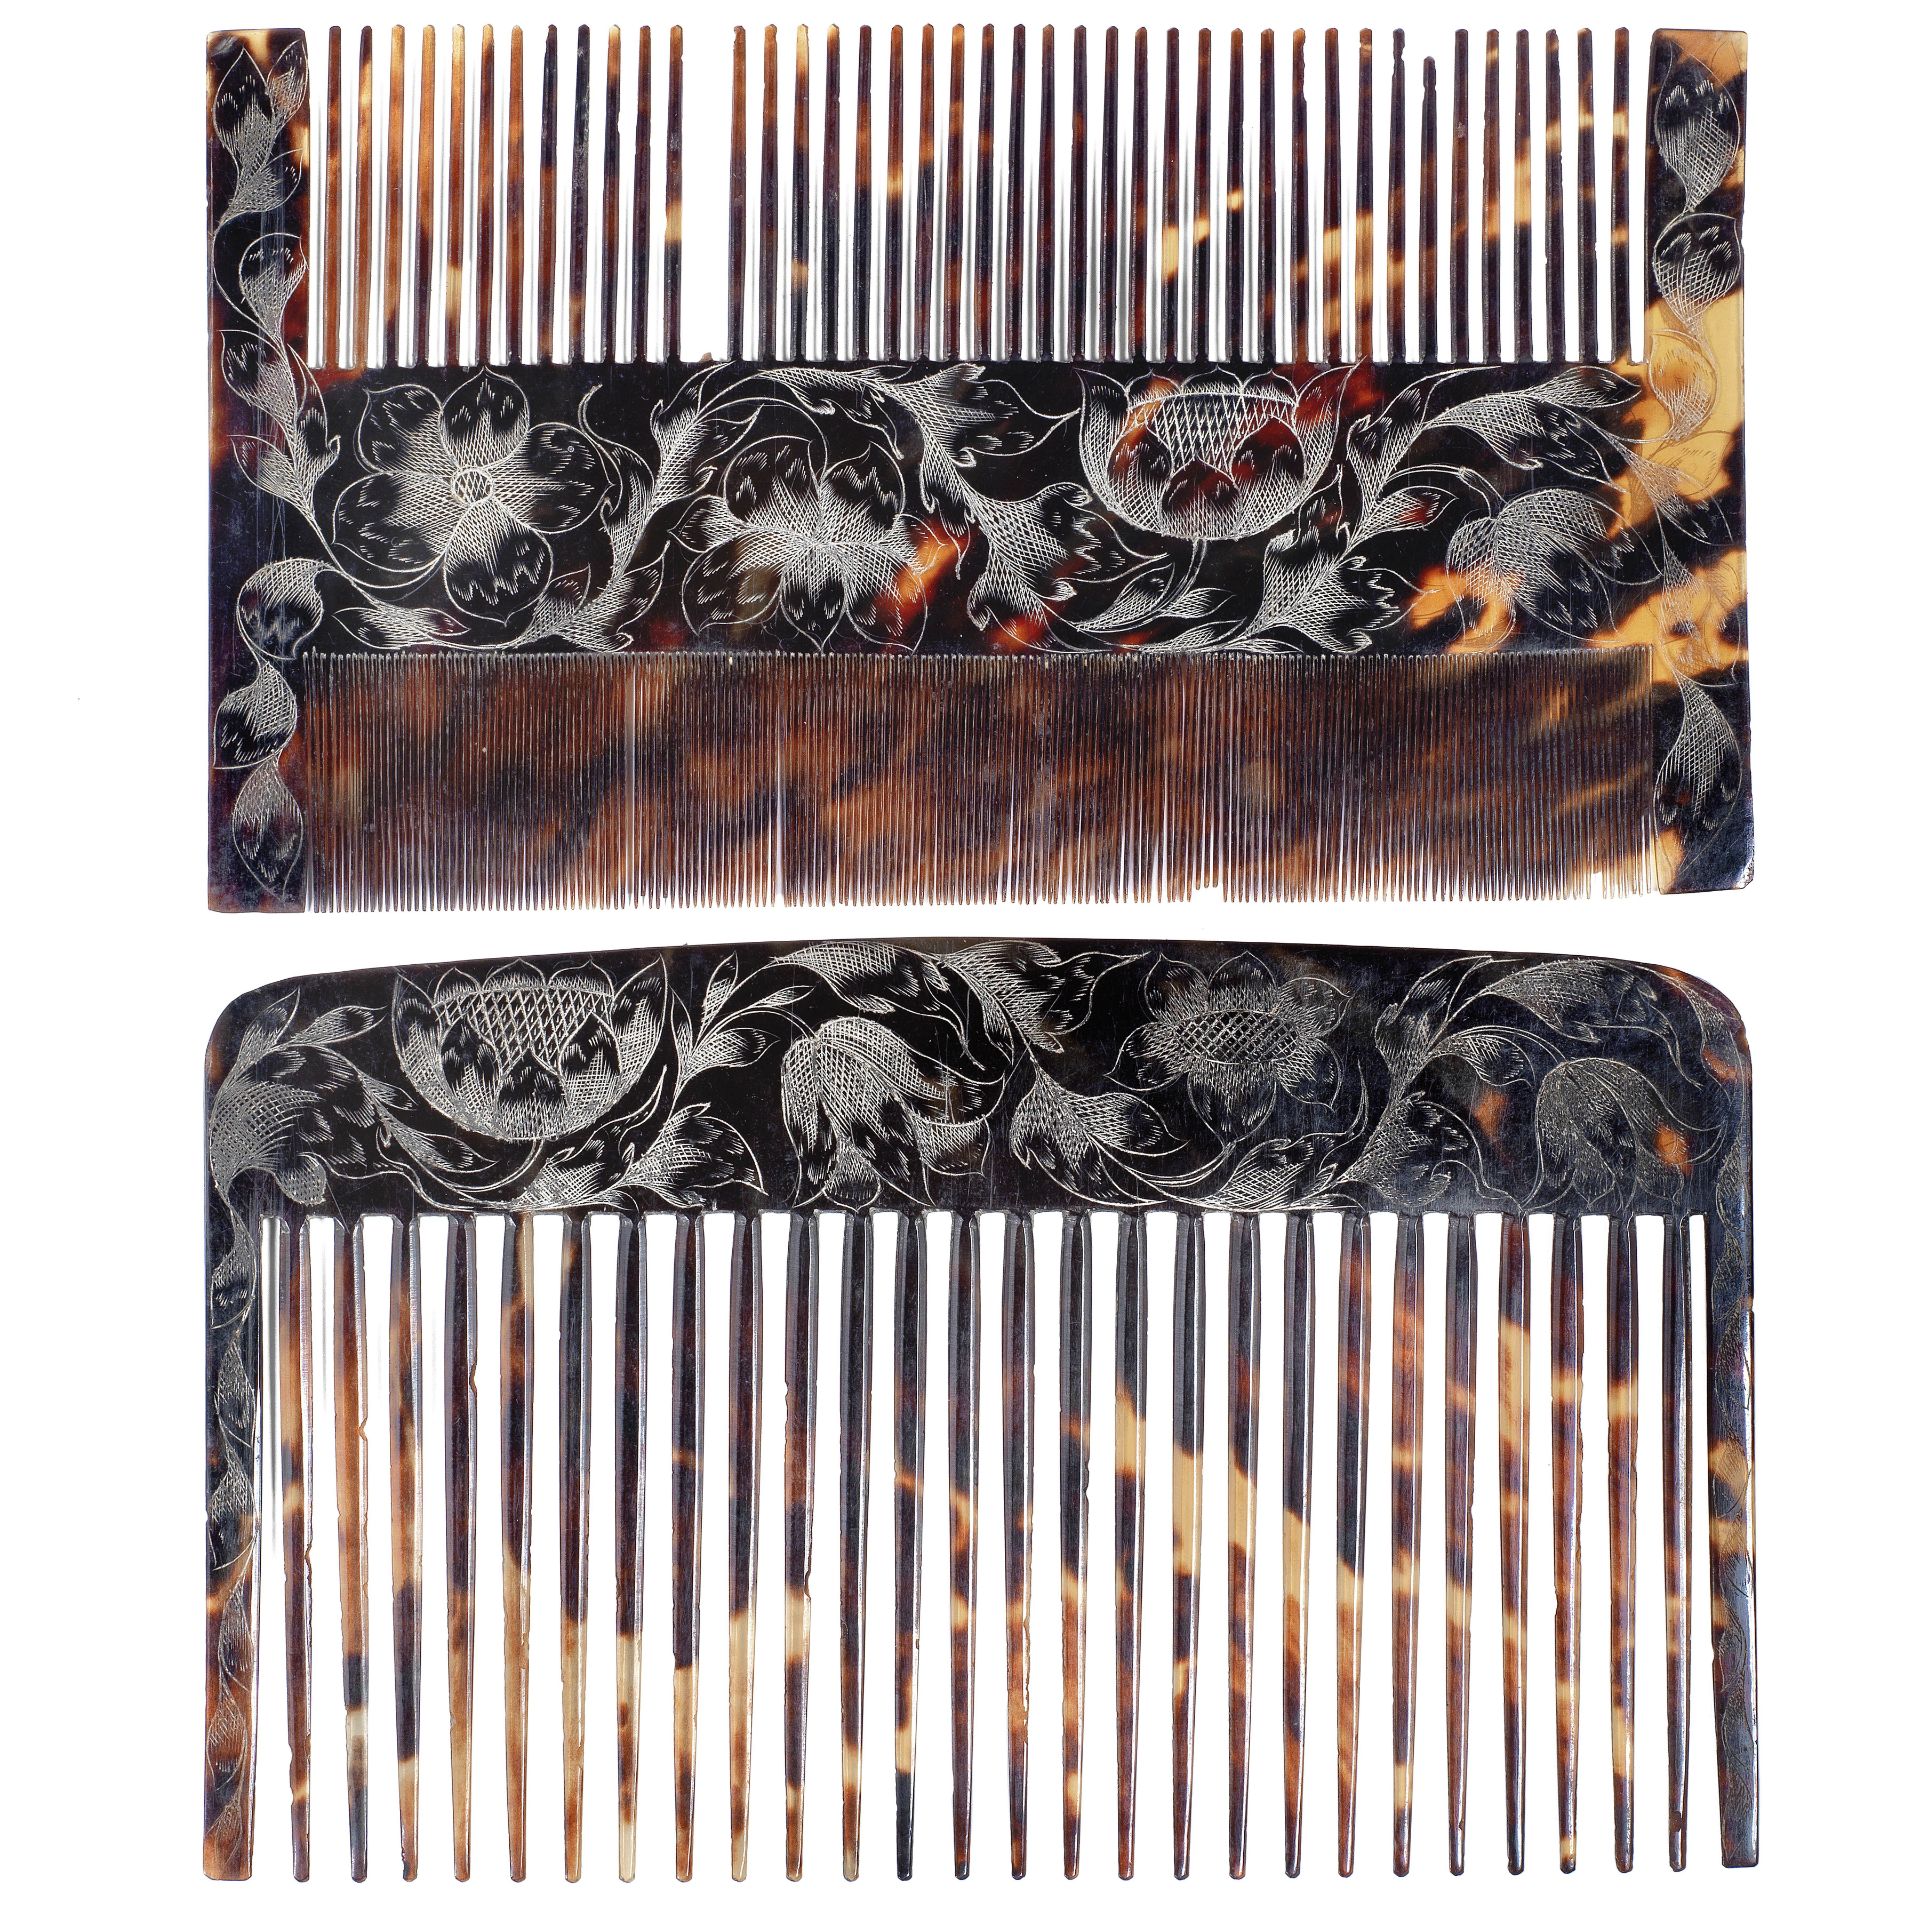 A rare late 17th century Jamaican colonial engraved tortoiseshell wig comb case containing two co...